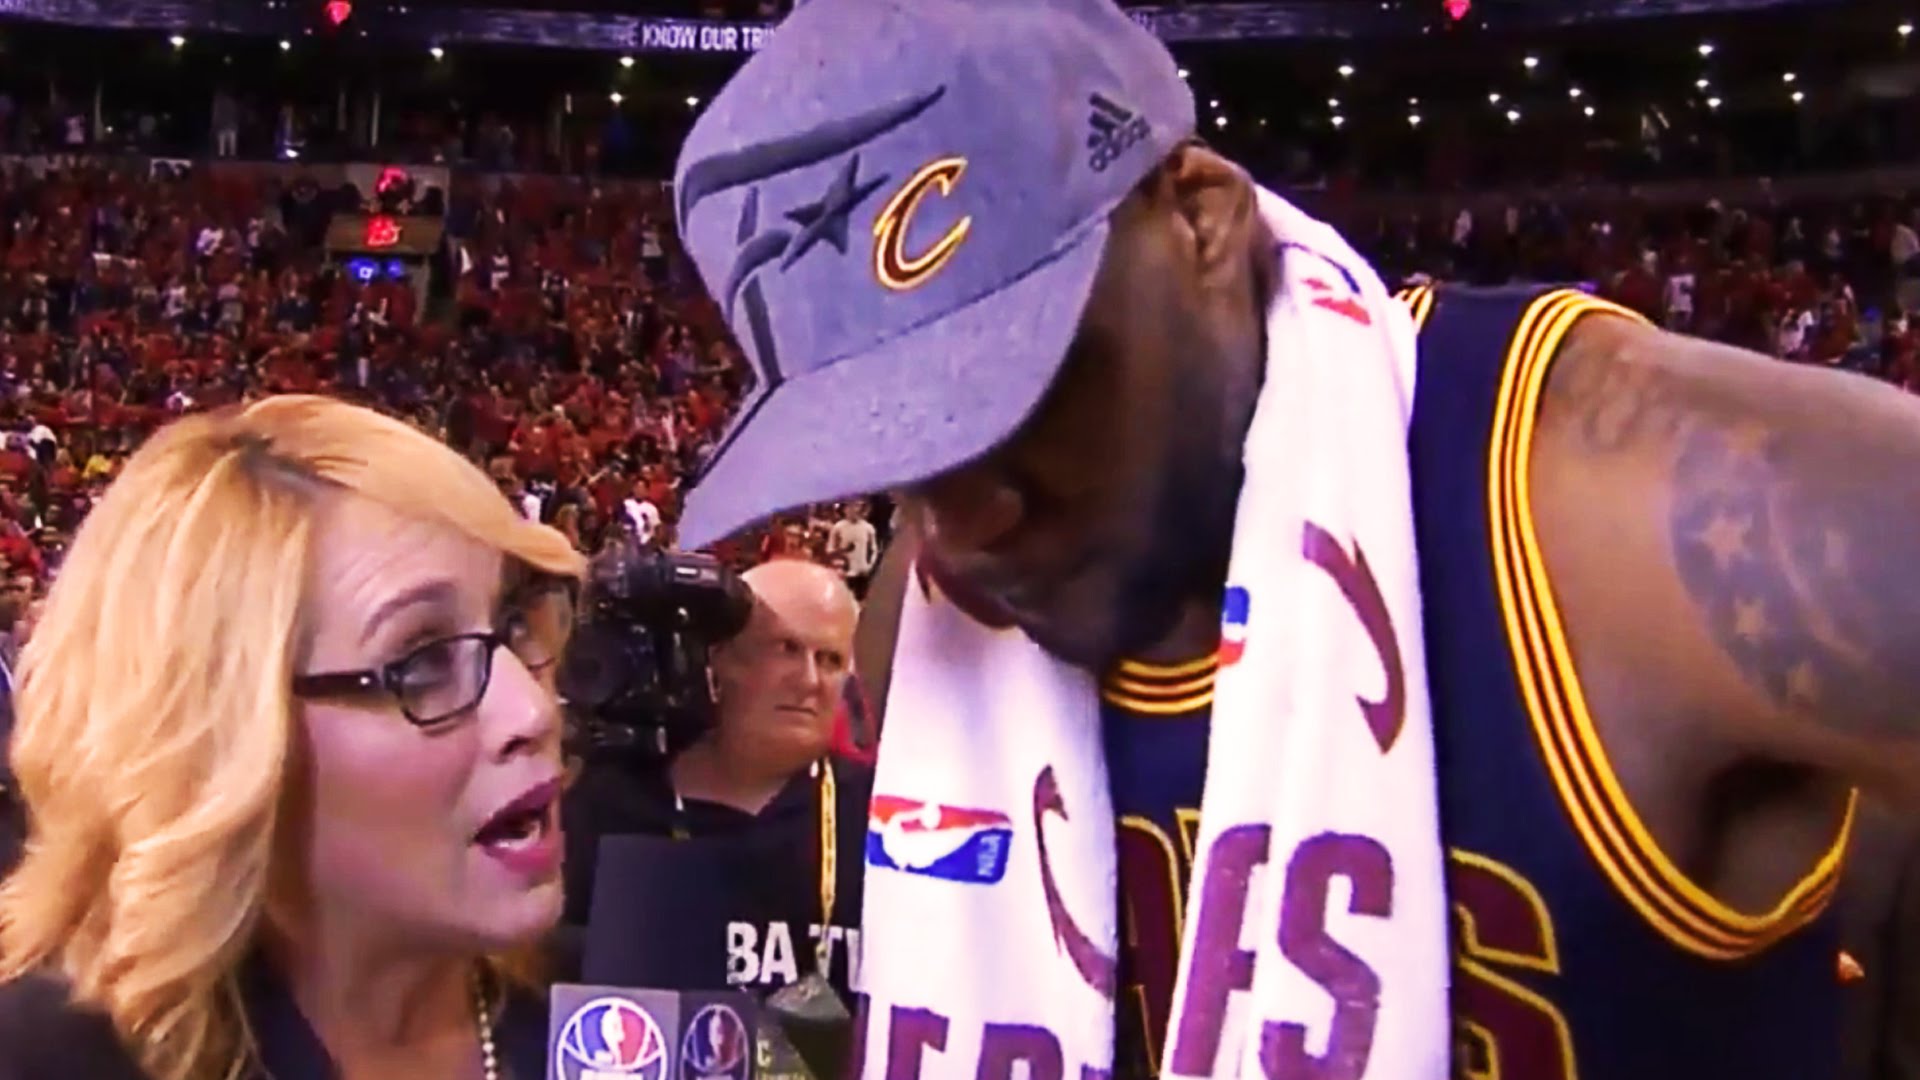 LeBron James gets emotional after 6th consecutive trip to NBA Finals